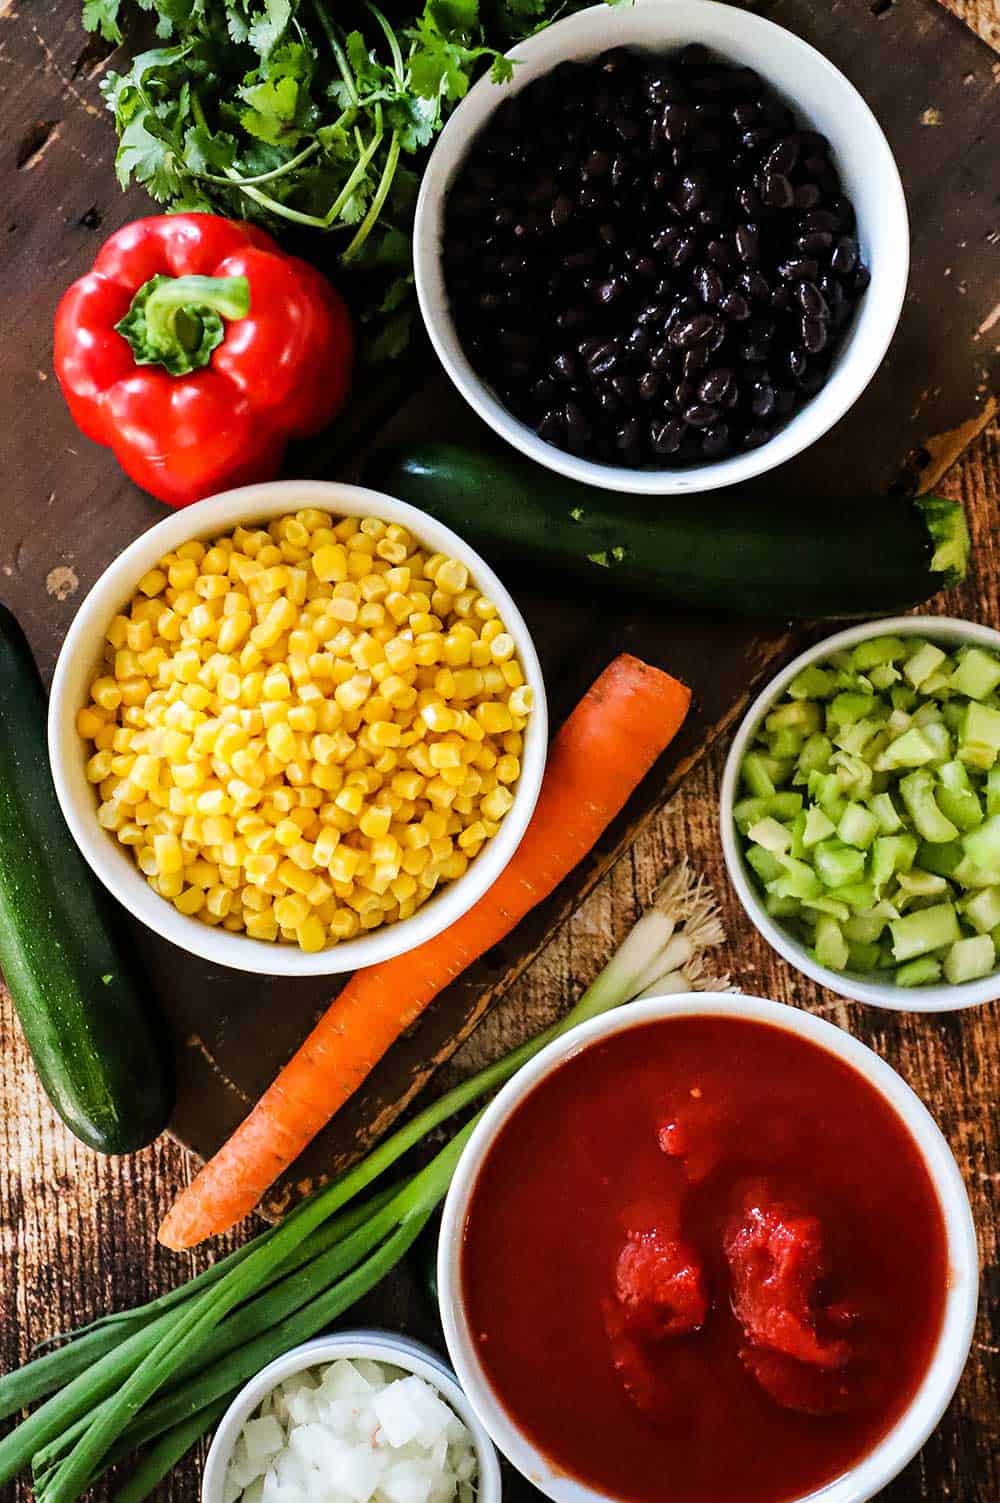 An assortment of bowls of fresh tomatoes, corn, celery, onions, and black beans.